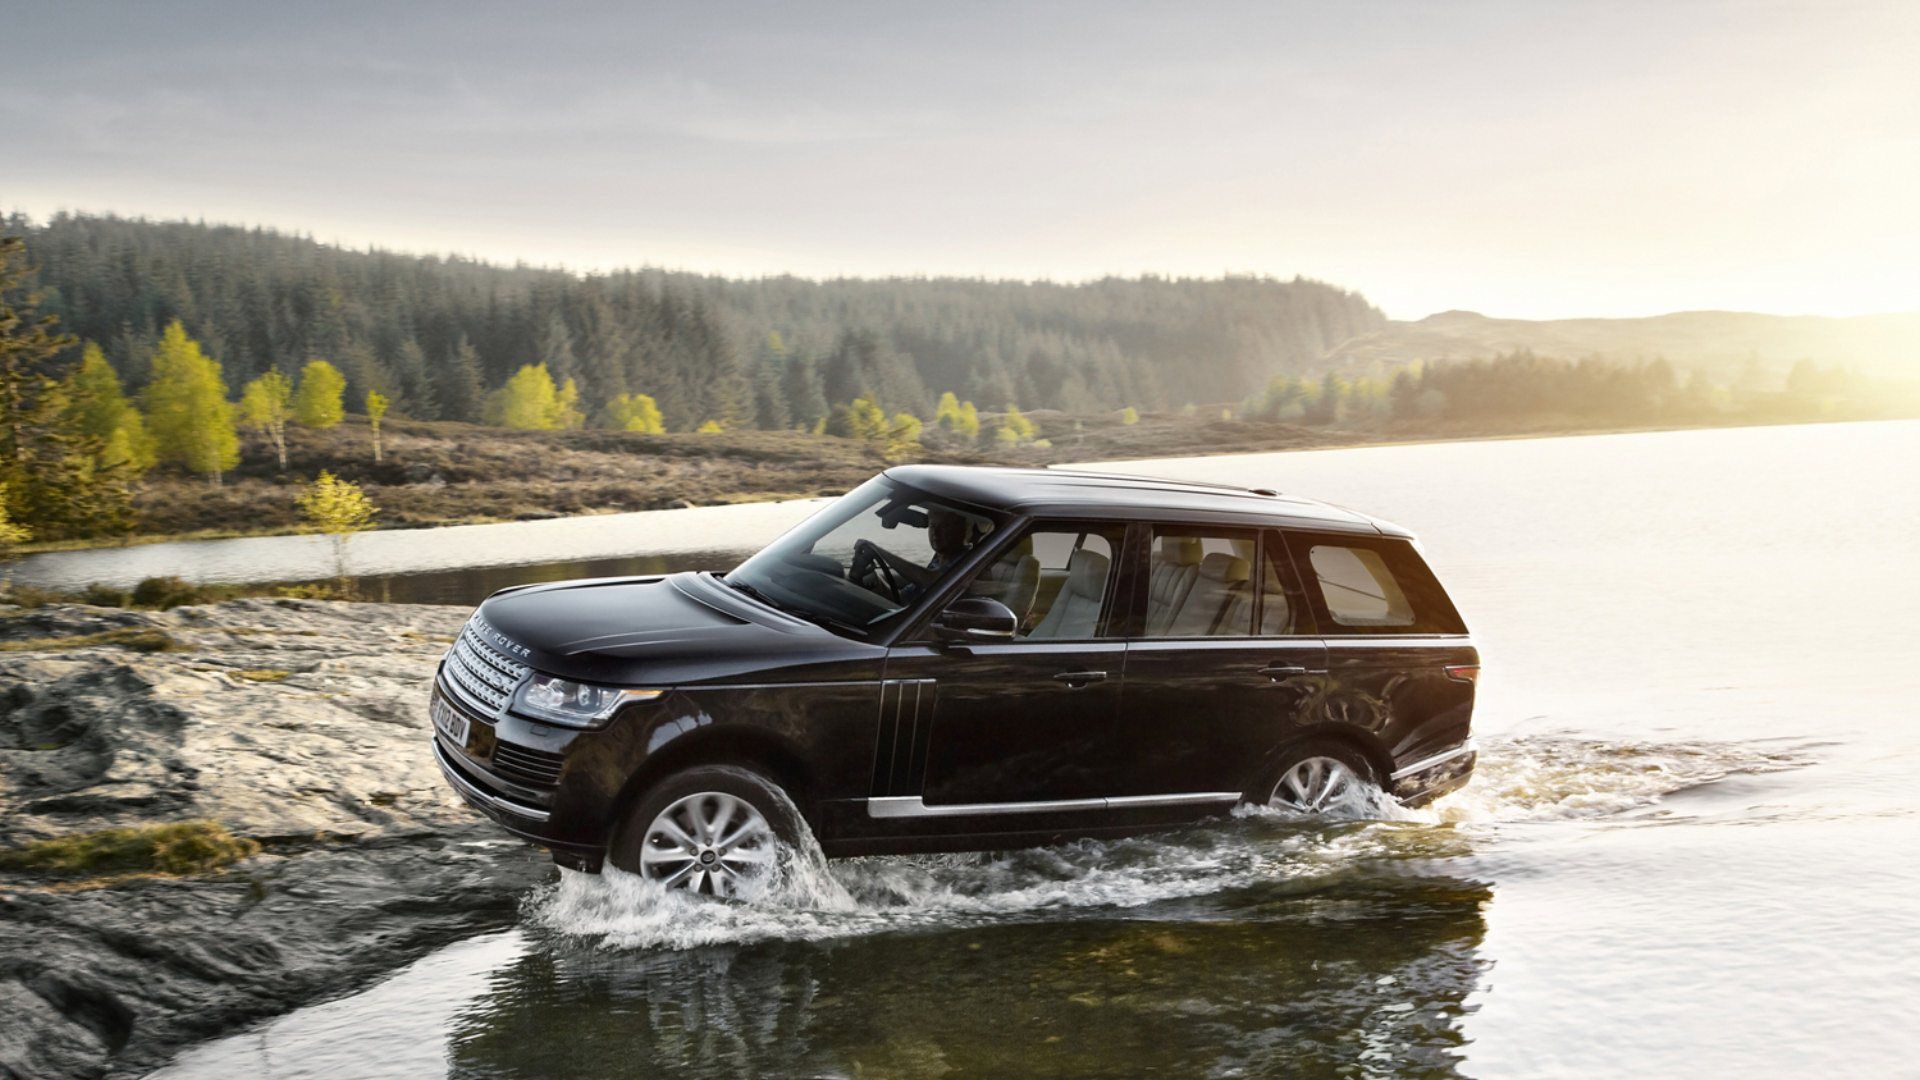 Land Rover Wallpaper Yahoo Image Search Results Range